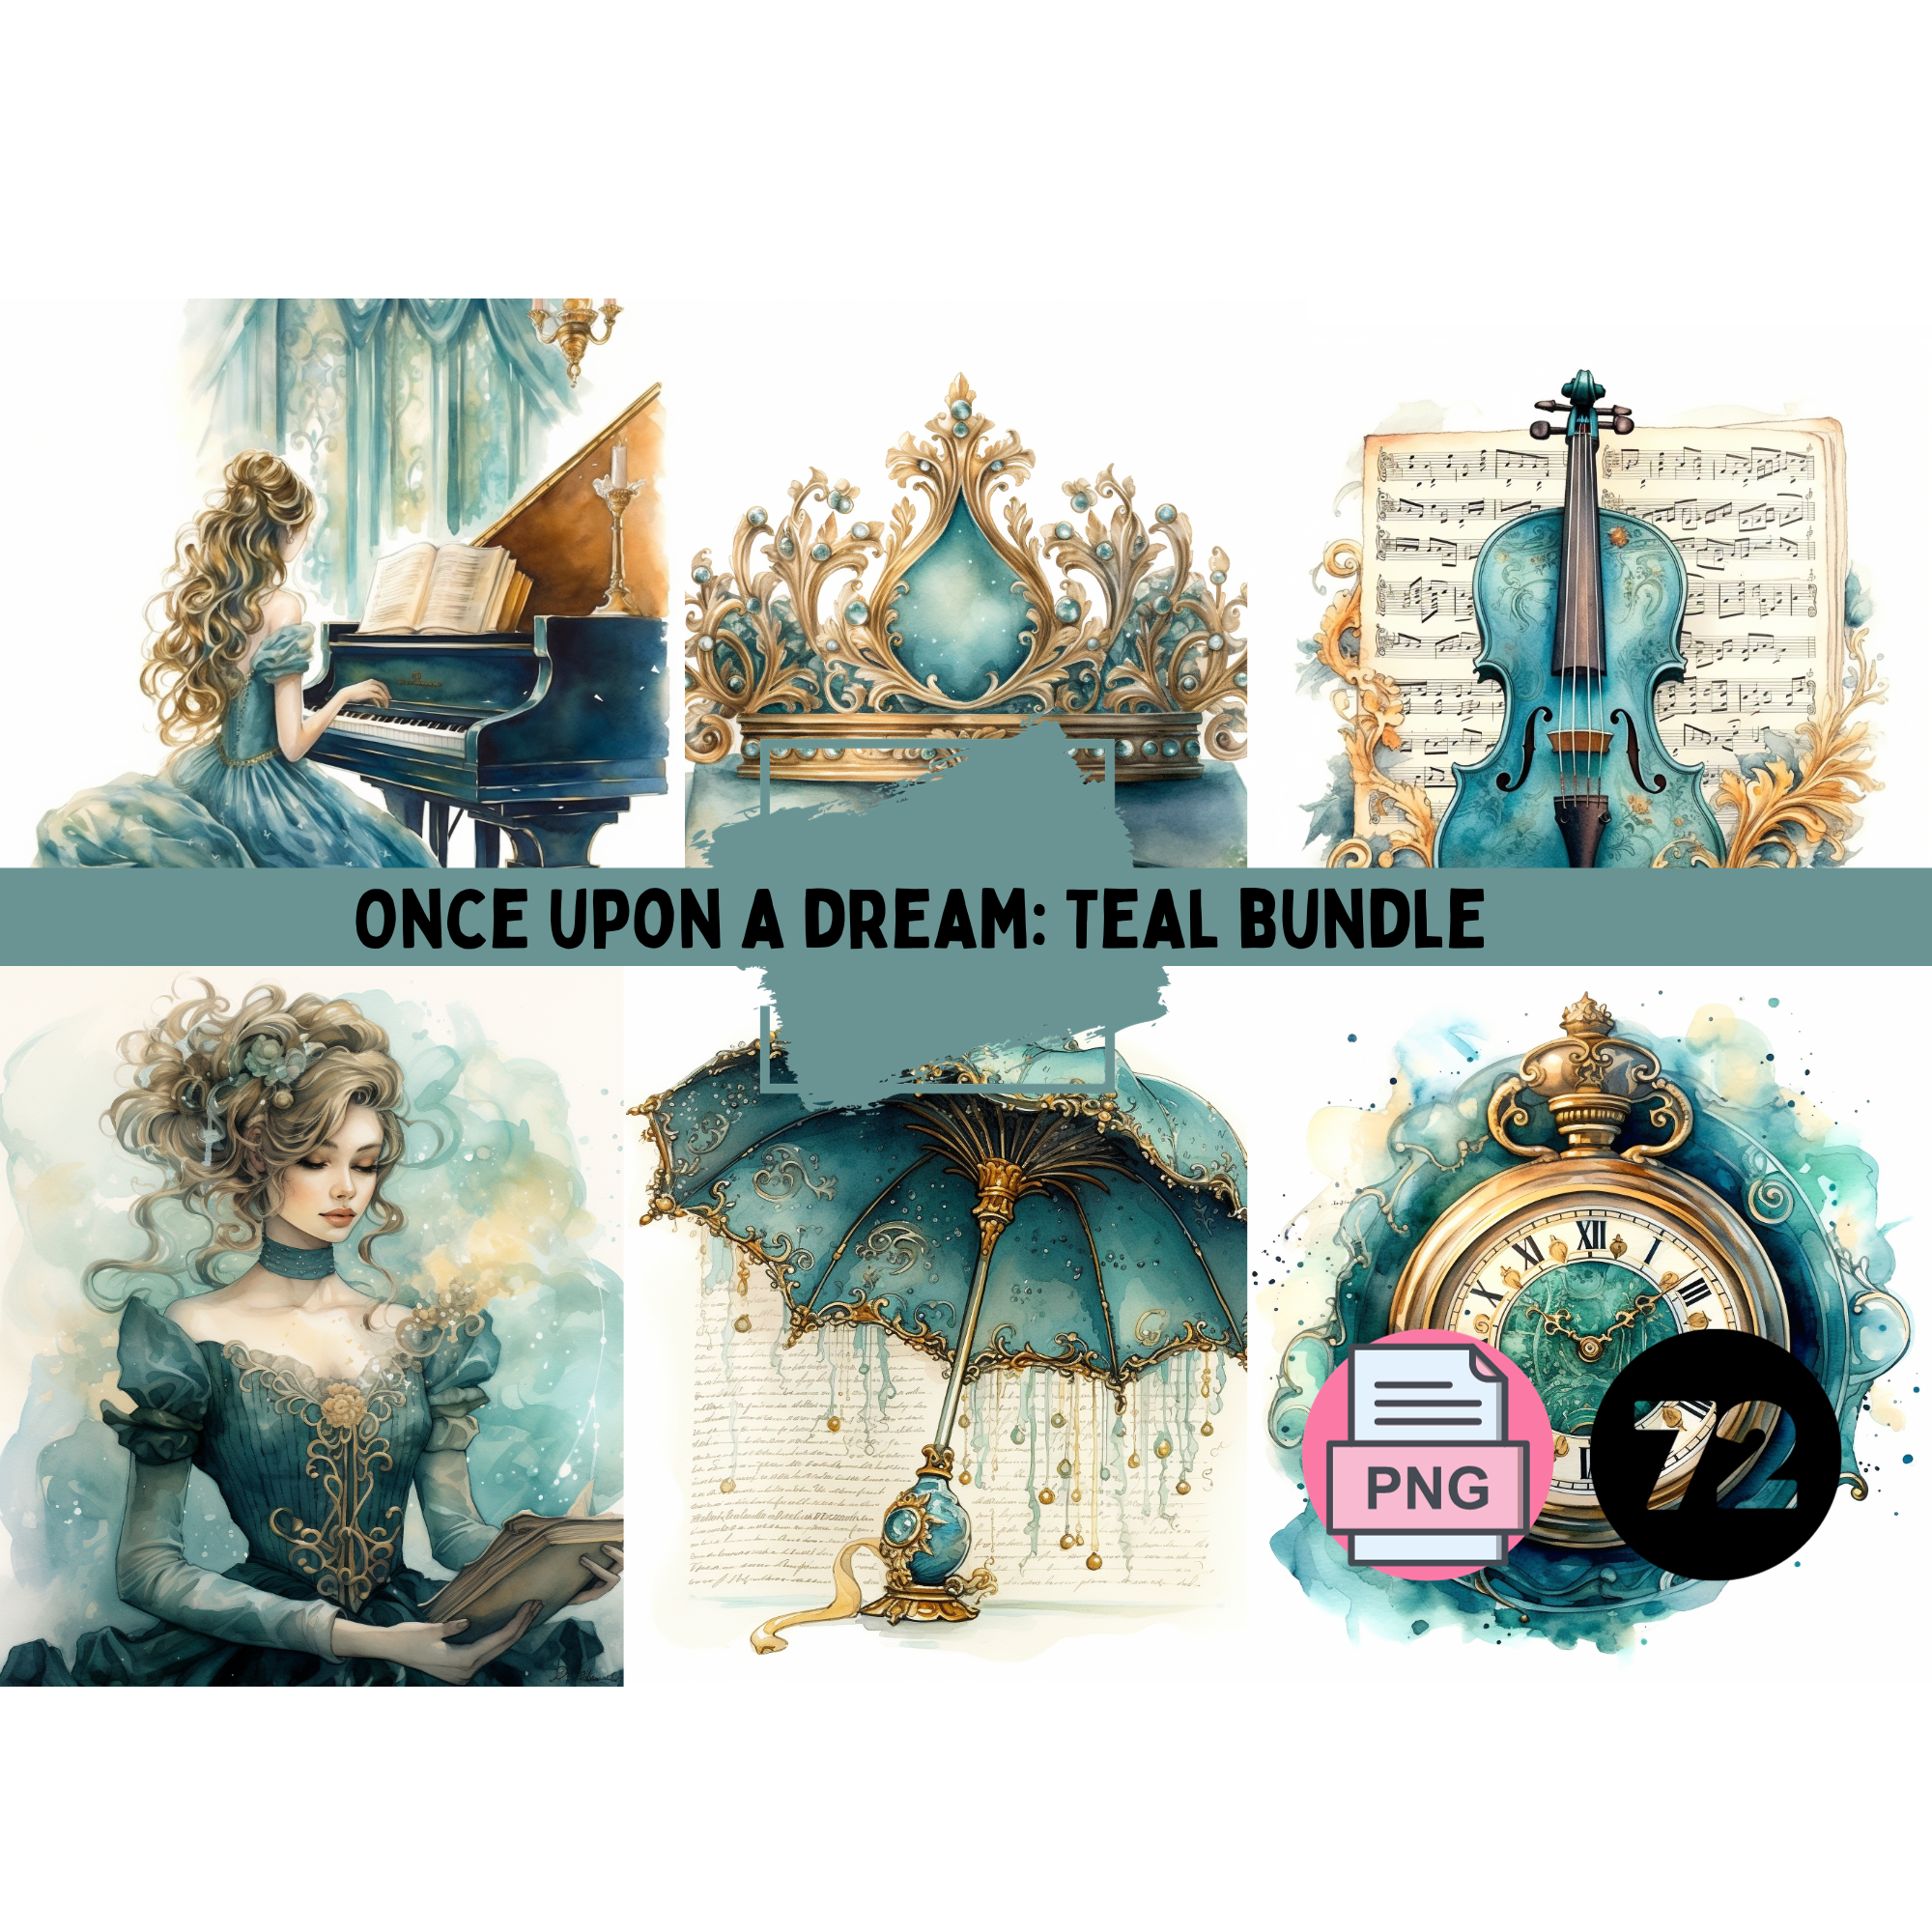 “Once Upon a Dream – Teal Bundle”